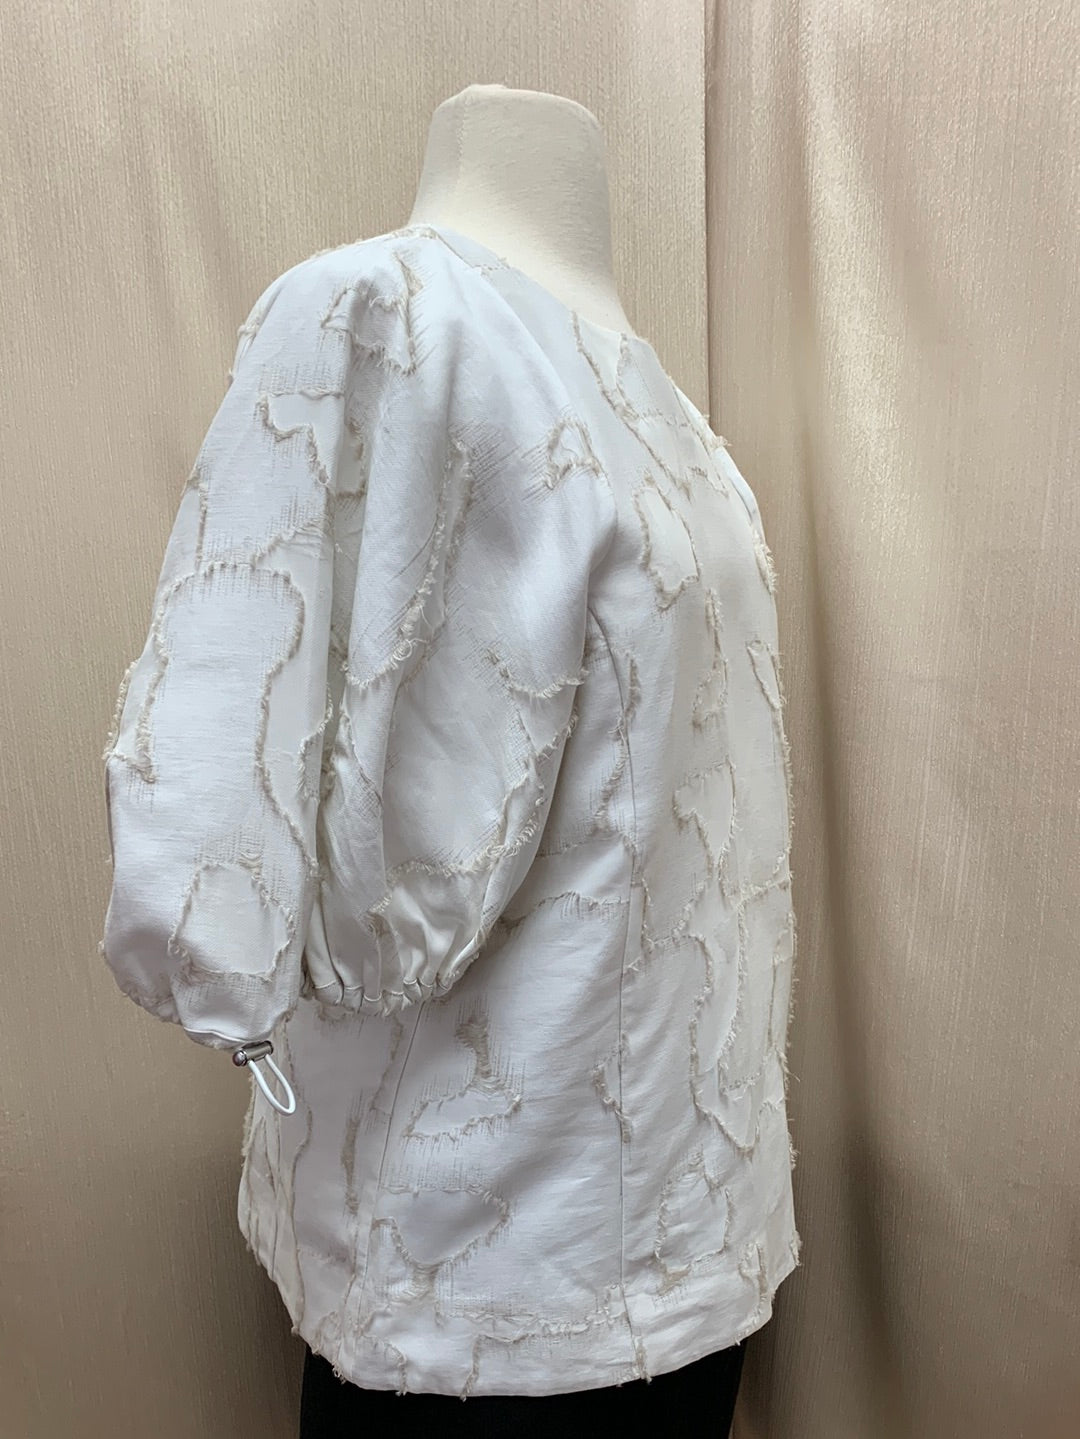 NWT - COS white beige Texture Pattern Puff Sleeve Shirt - US 8